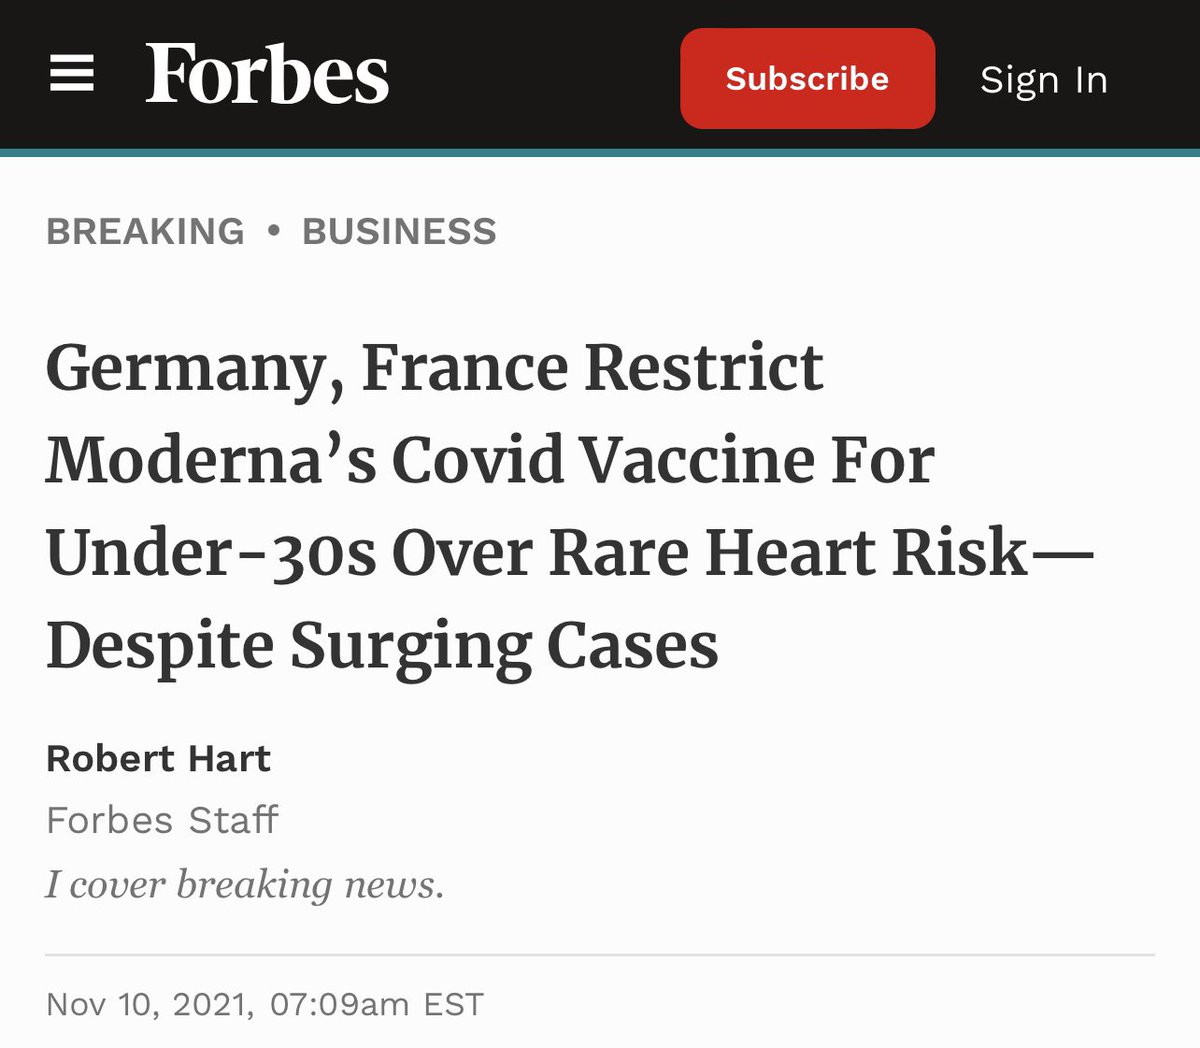 @ianbremmer Also, look what Germany and France did! Now call them far right conspiracy theorist antivaxxers 😅